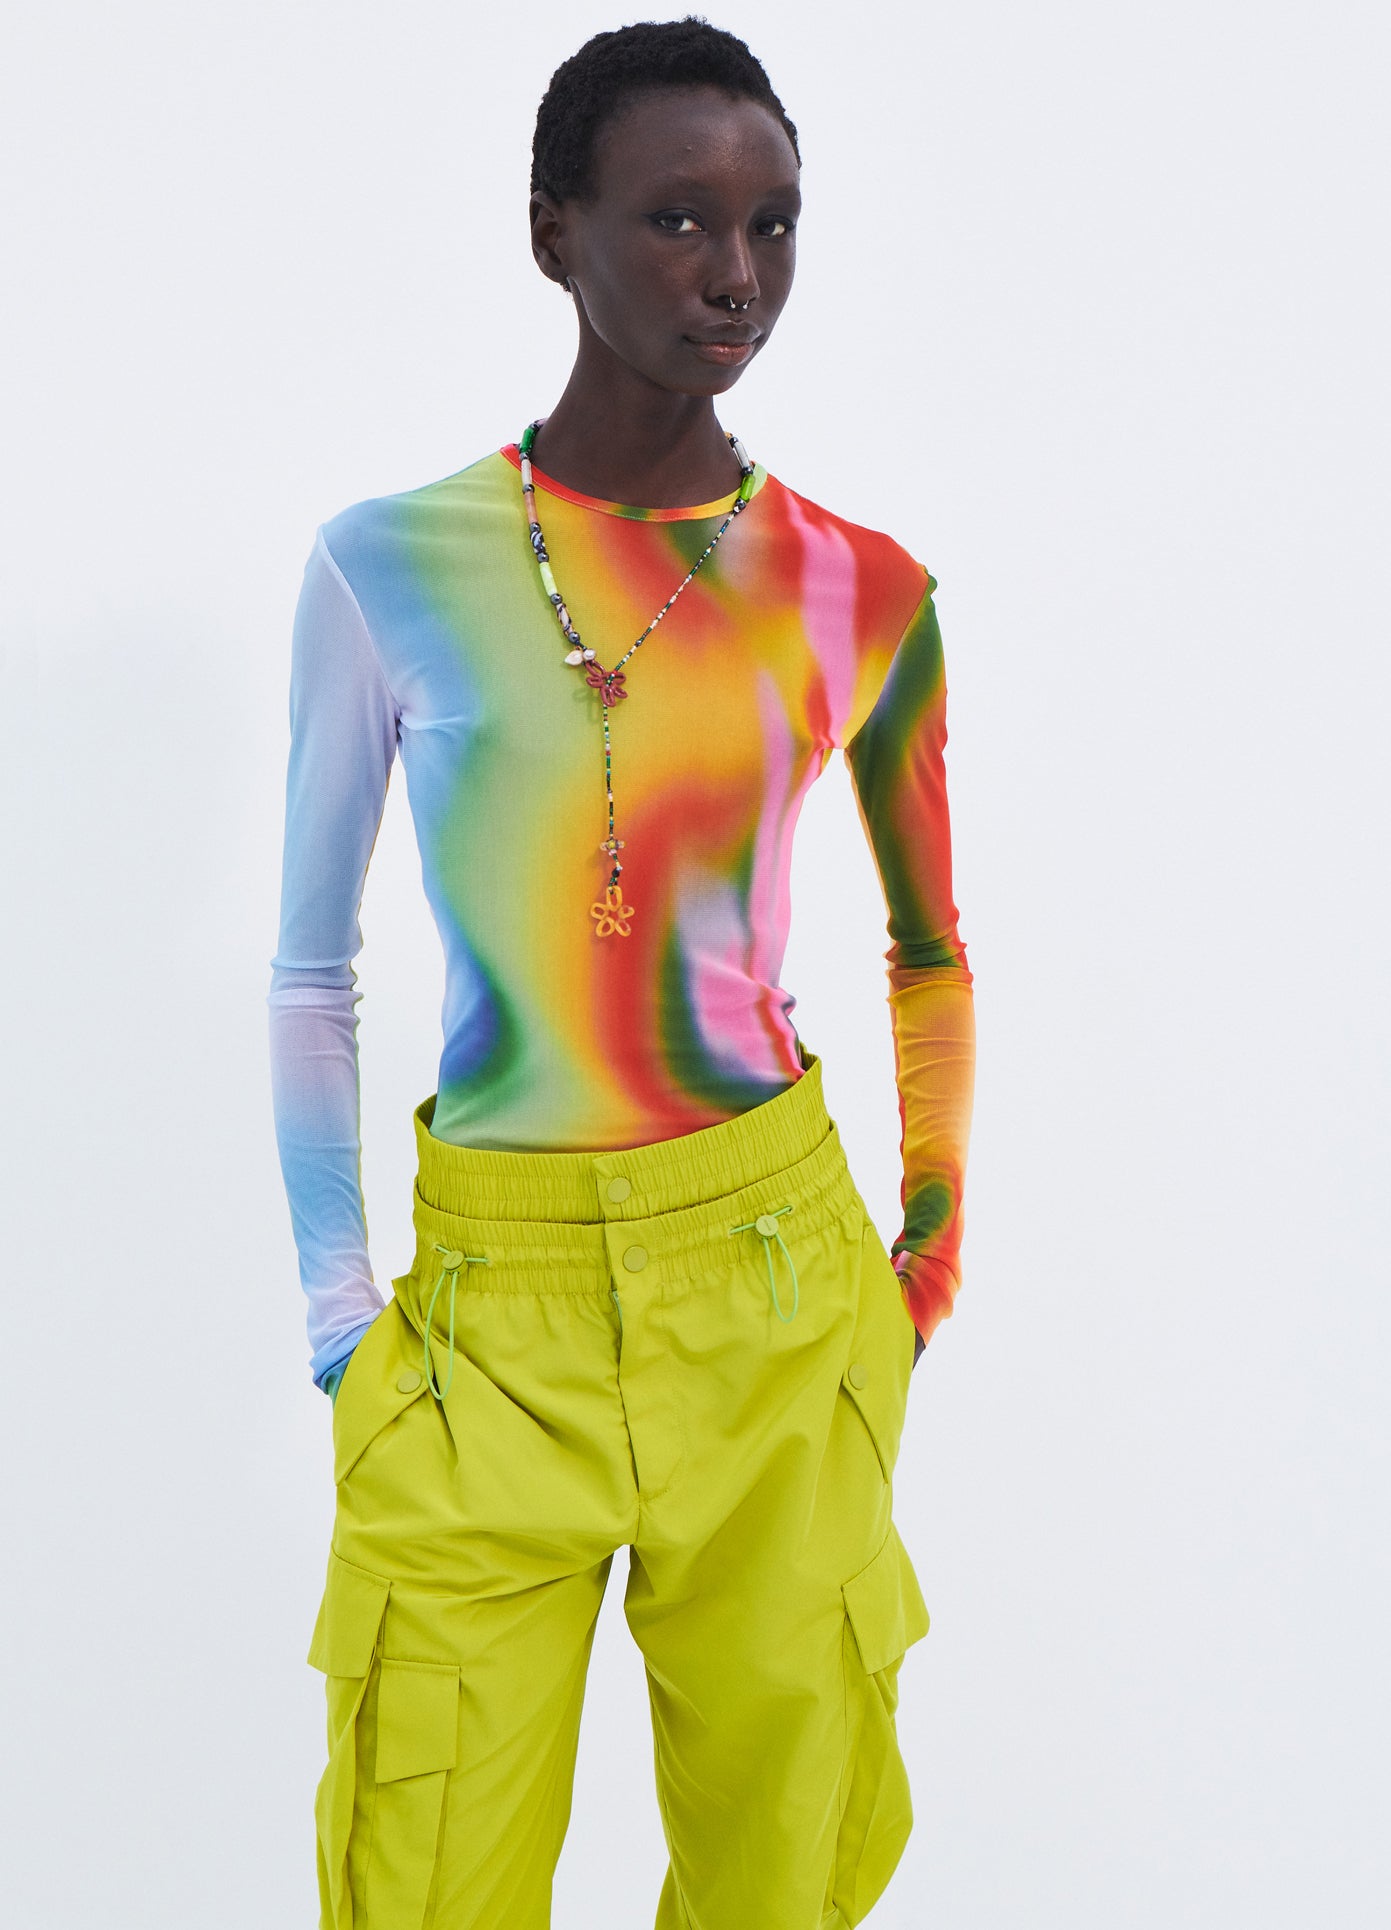 MONSE Rainbow Heatwave Mesh Top in Multi Colors on model front view